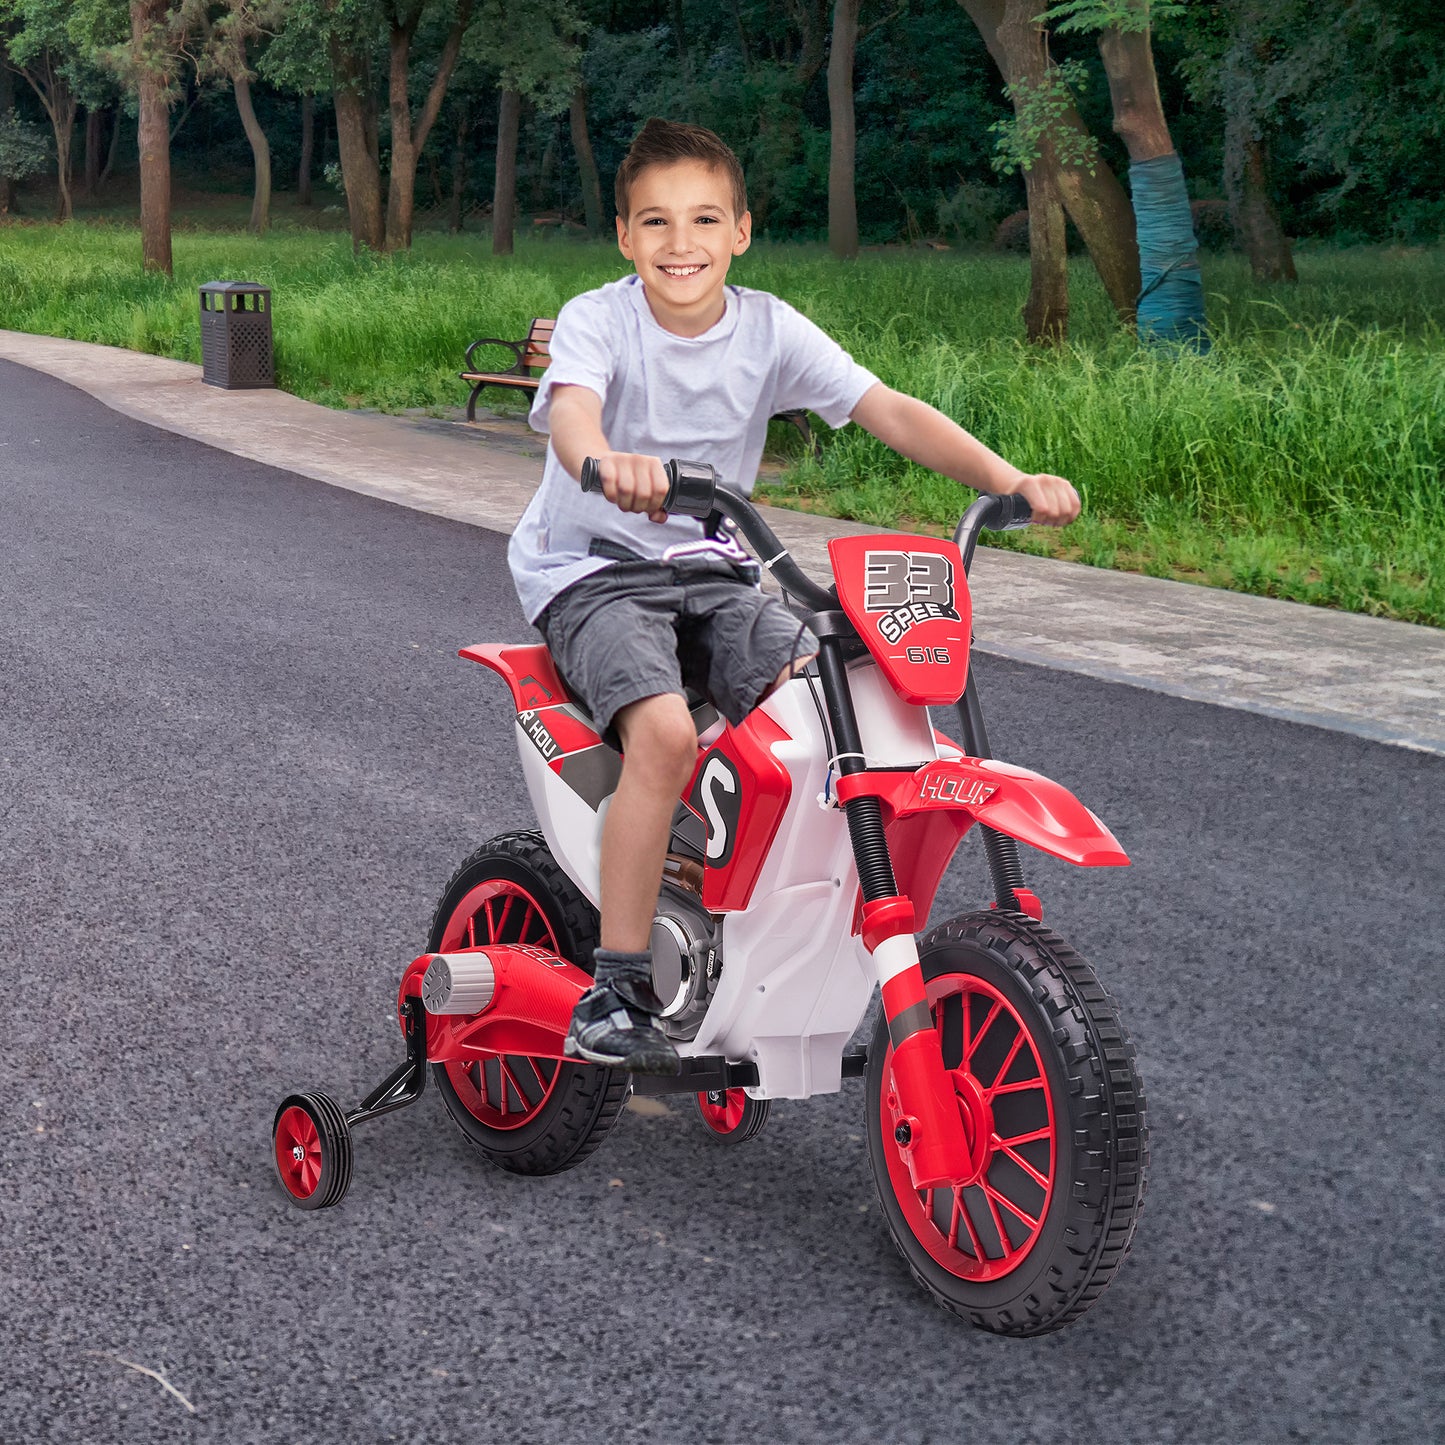 12V Kids Ride on Toy Motorcycle, Electric Motor Toy Bike with Training Wheels for Kids 3-6, Red